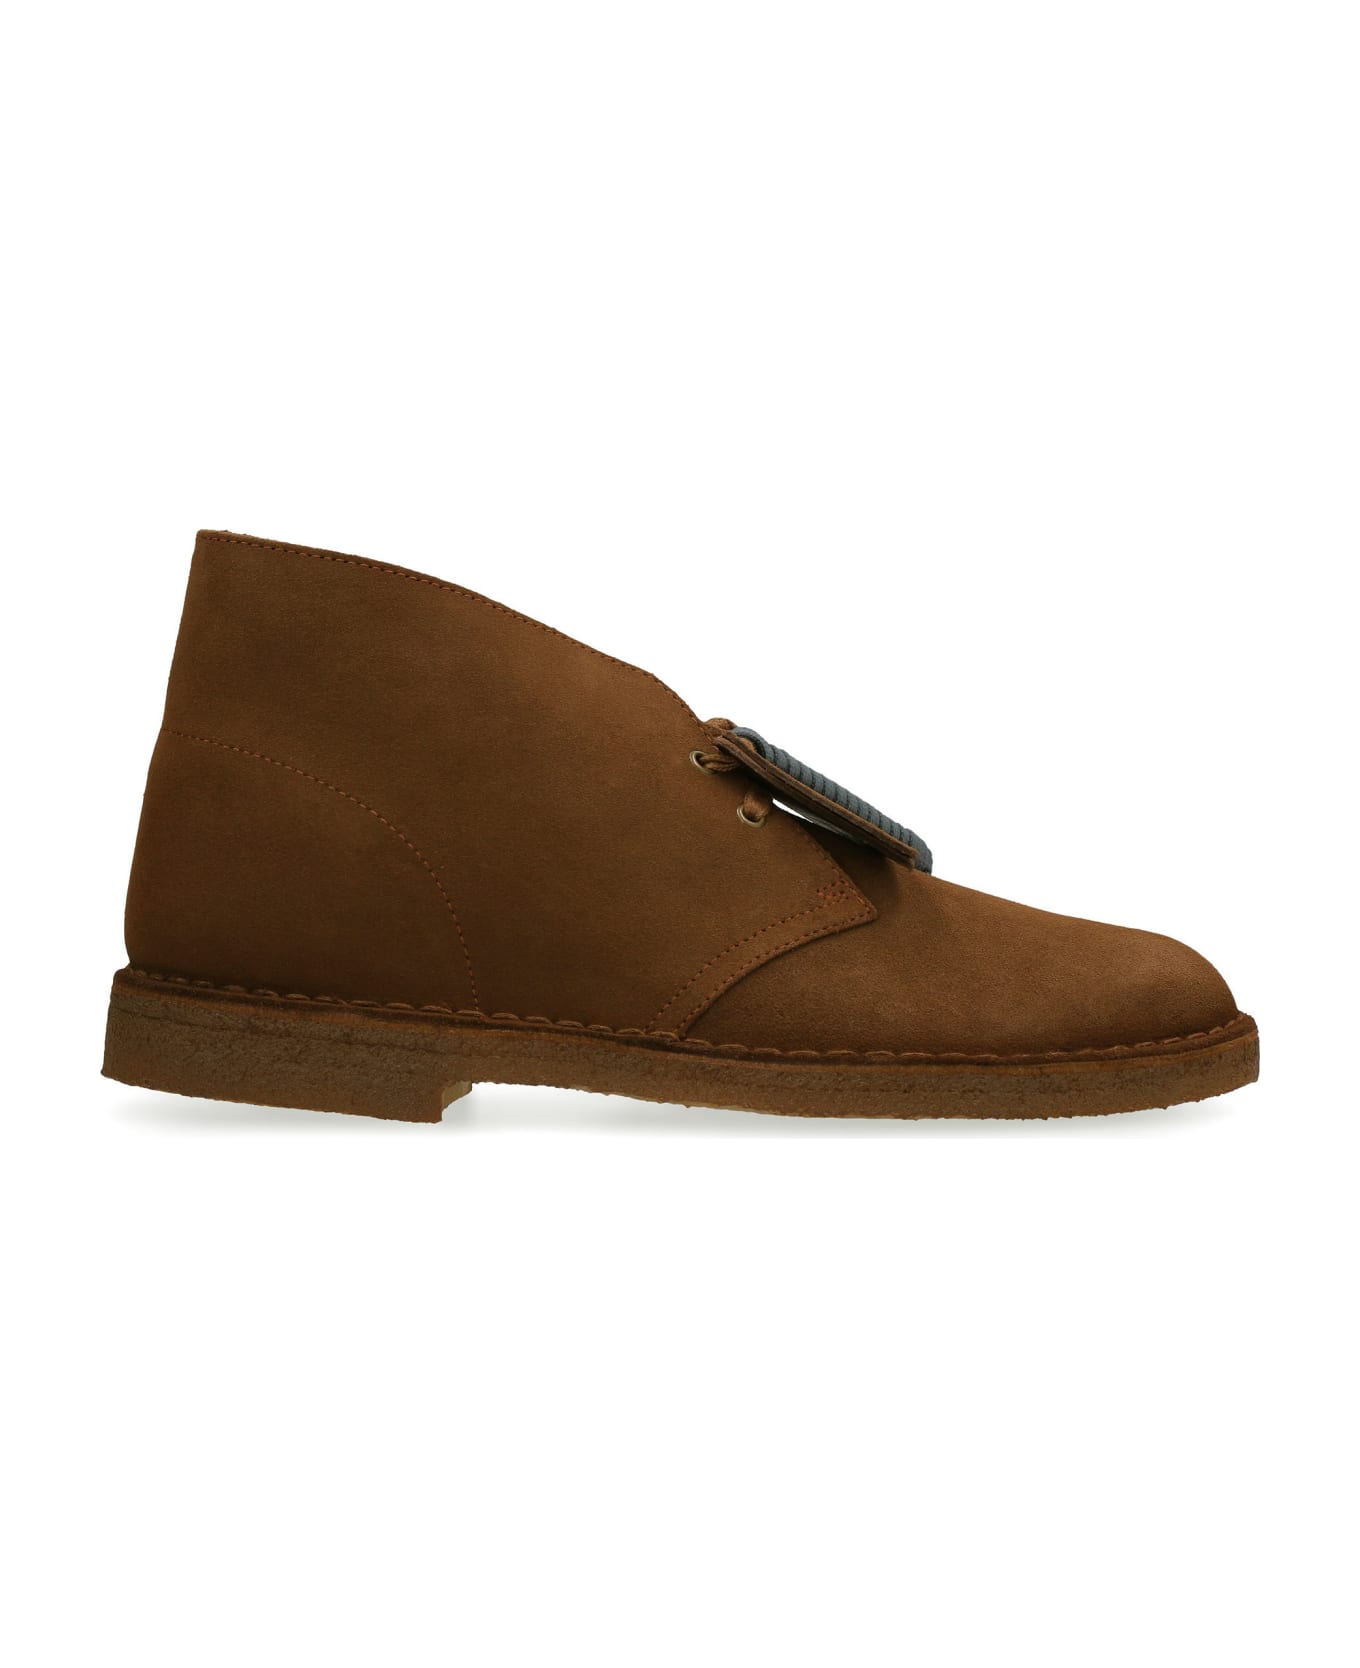 Clarks Suede Desert Boots - Saddle Brown